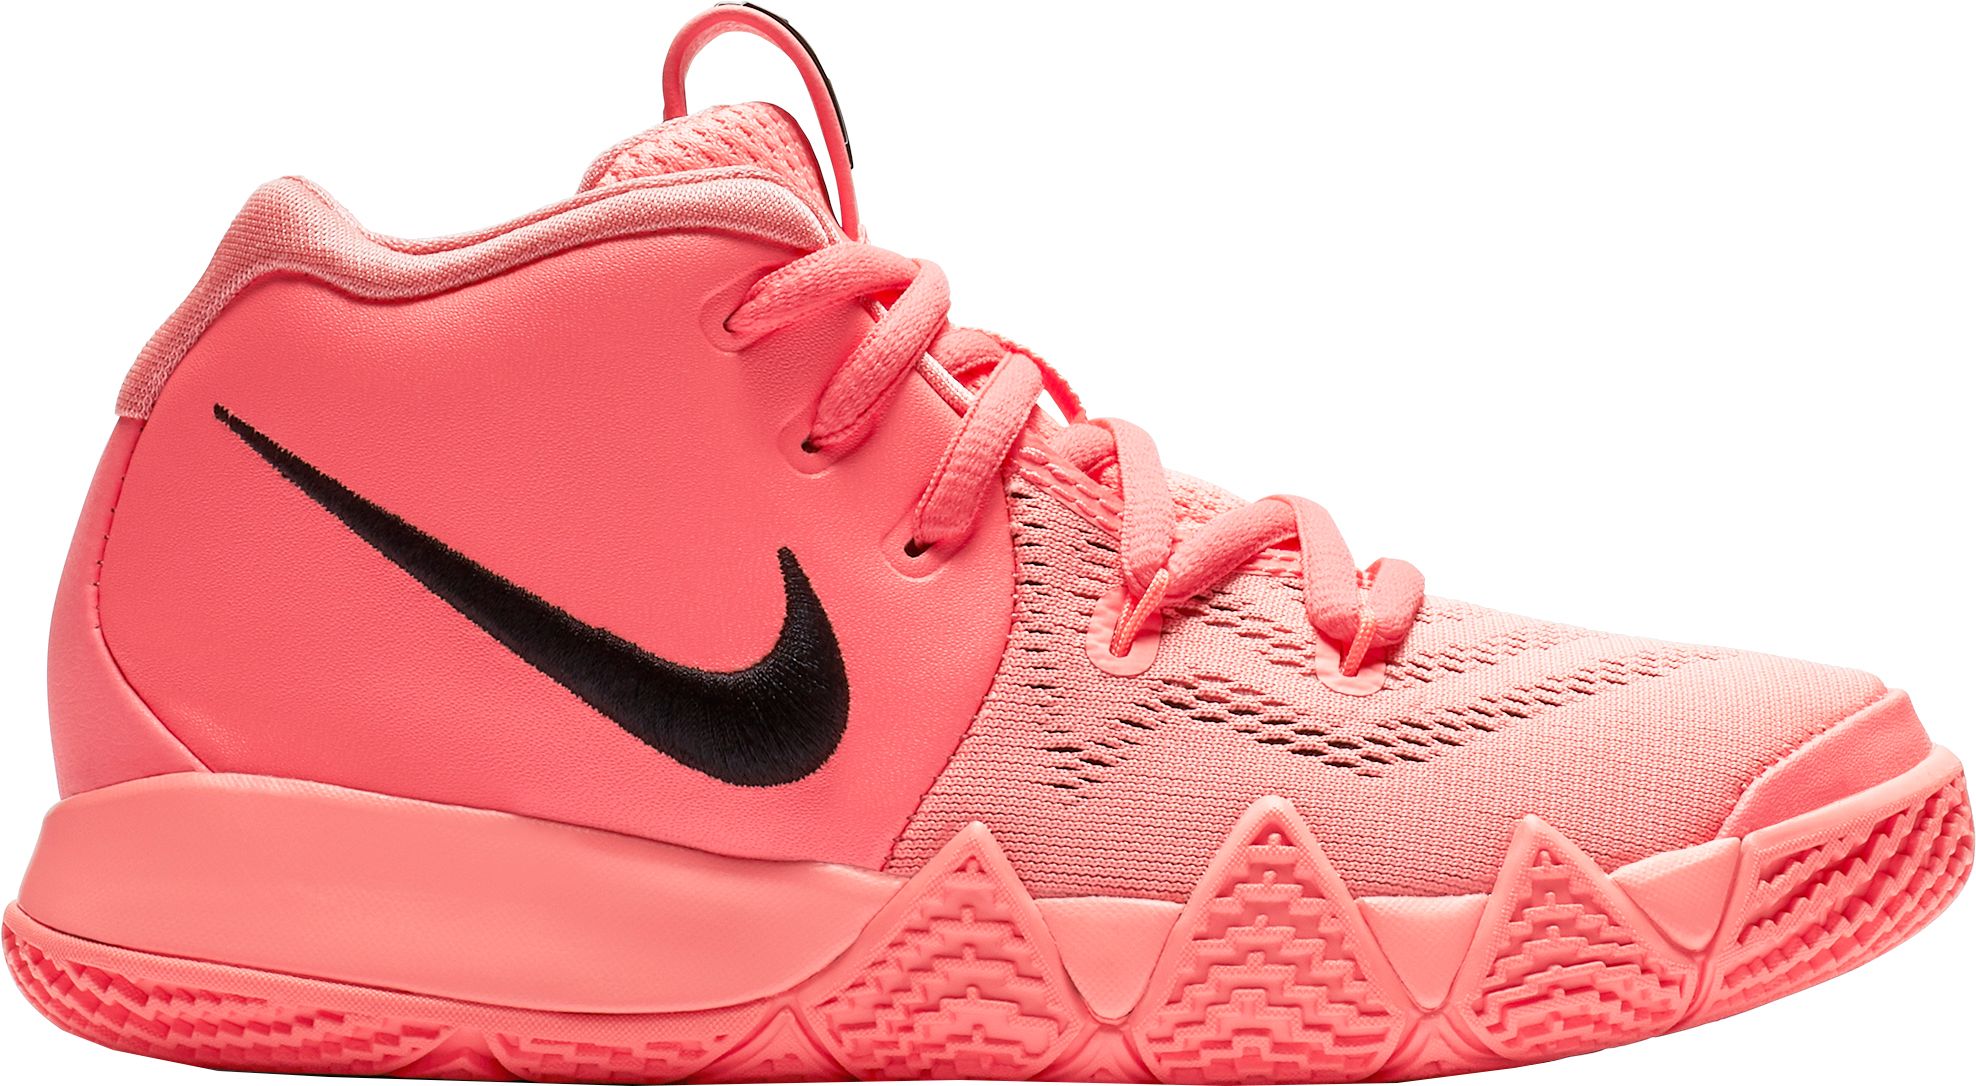 kyrie 4s pink